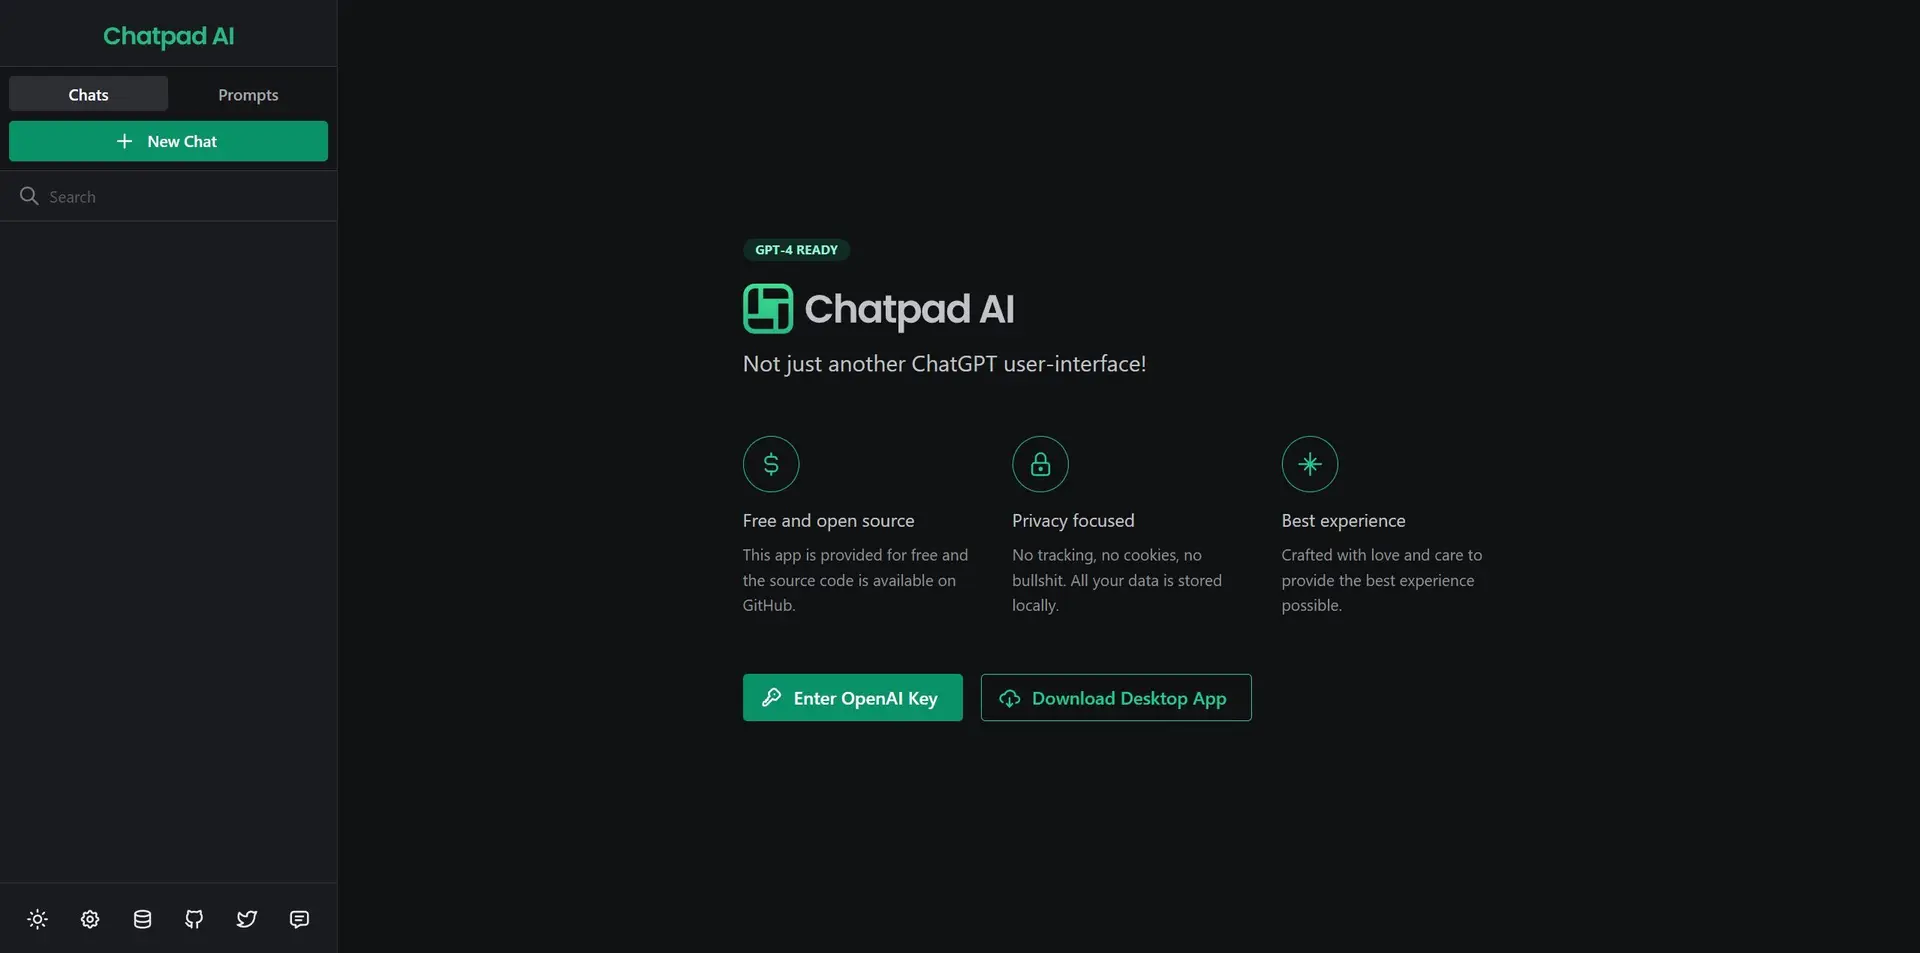 Chatpad AIwebsite picture